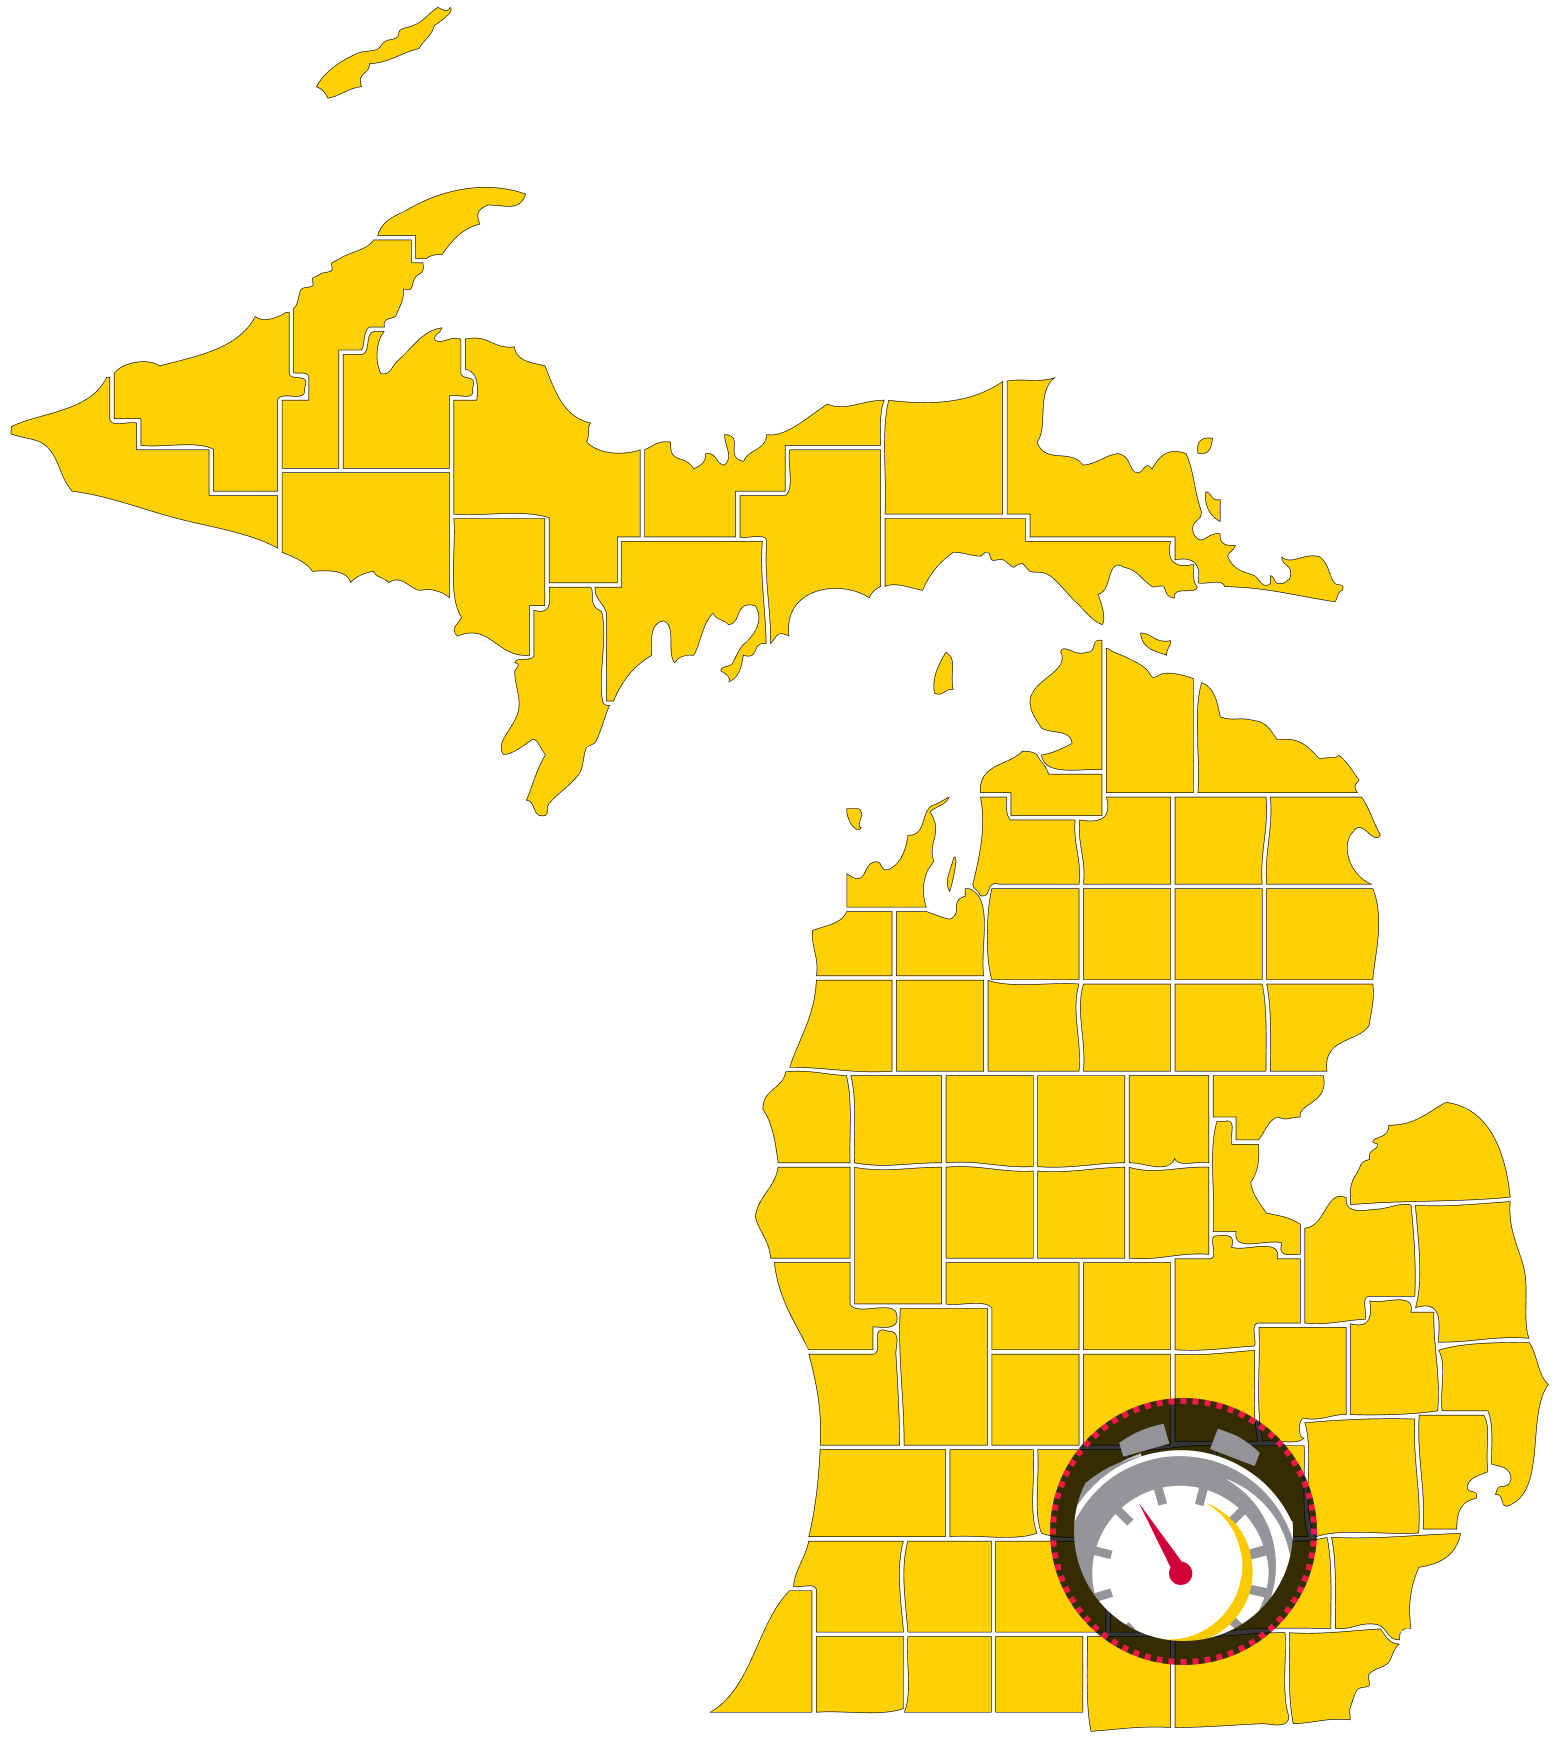 Map of Michigan with highlighted counties in the Eastern Time Zone, marked by plumbing symbols on the southeastern and southern parts of the state.